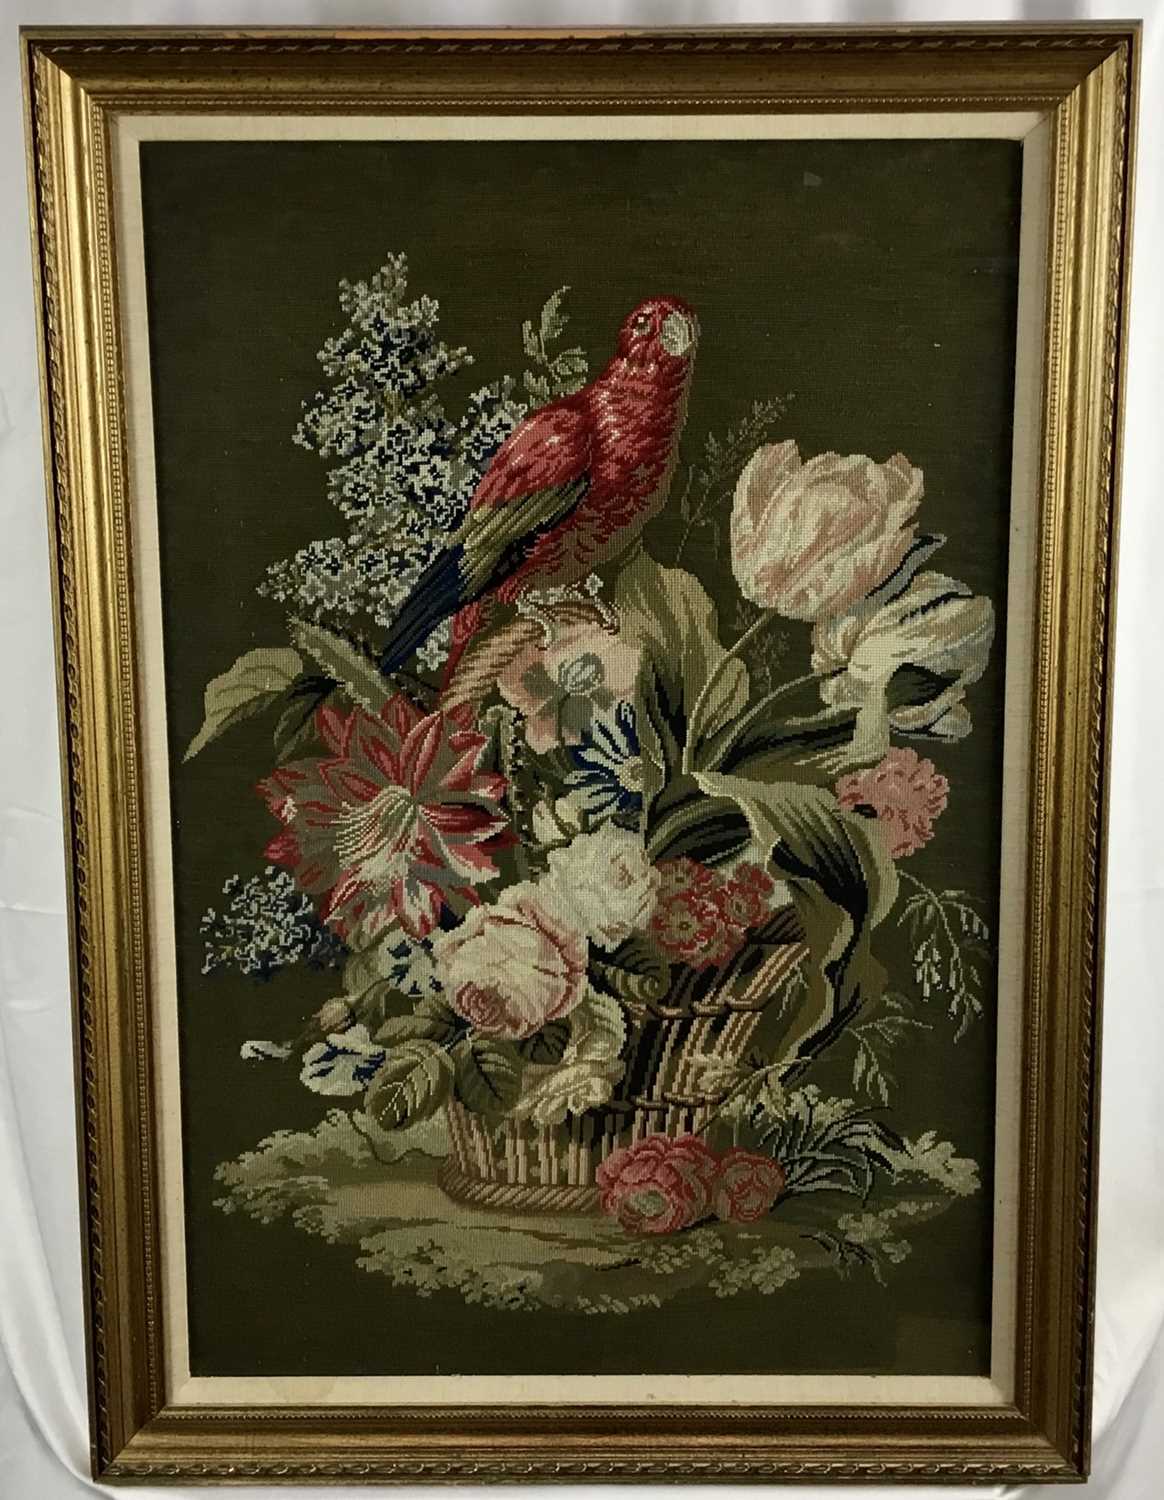 Lot 429 - Victorian-style tapestry panel depicting a parrot among flowers, 76cm x 50cm, in glazed frame, together with tapestry pole screen mounted in a frame, 50cm x 40cm (2)